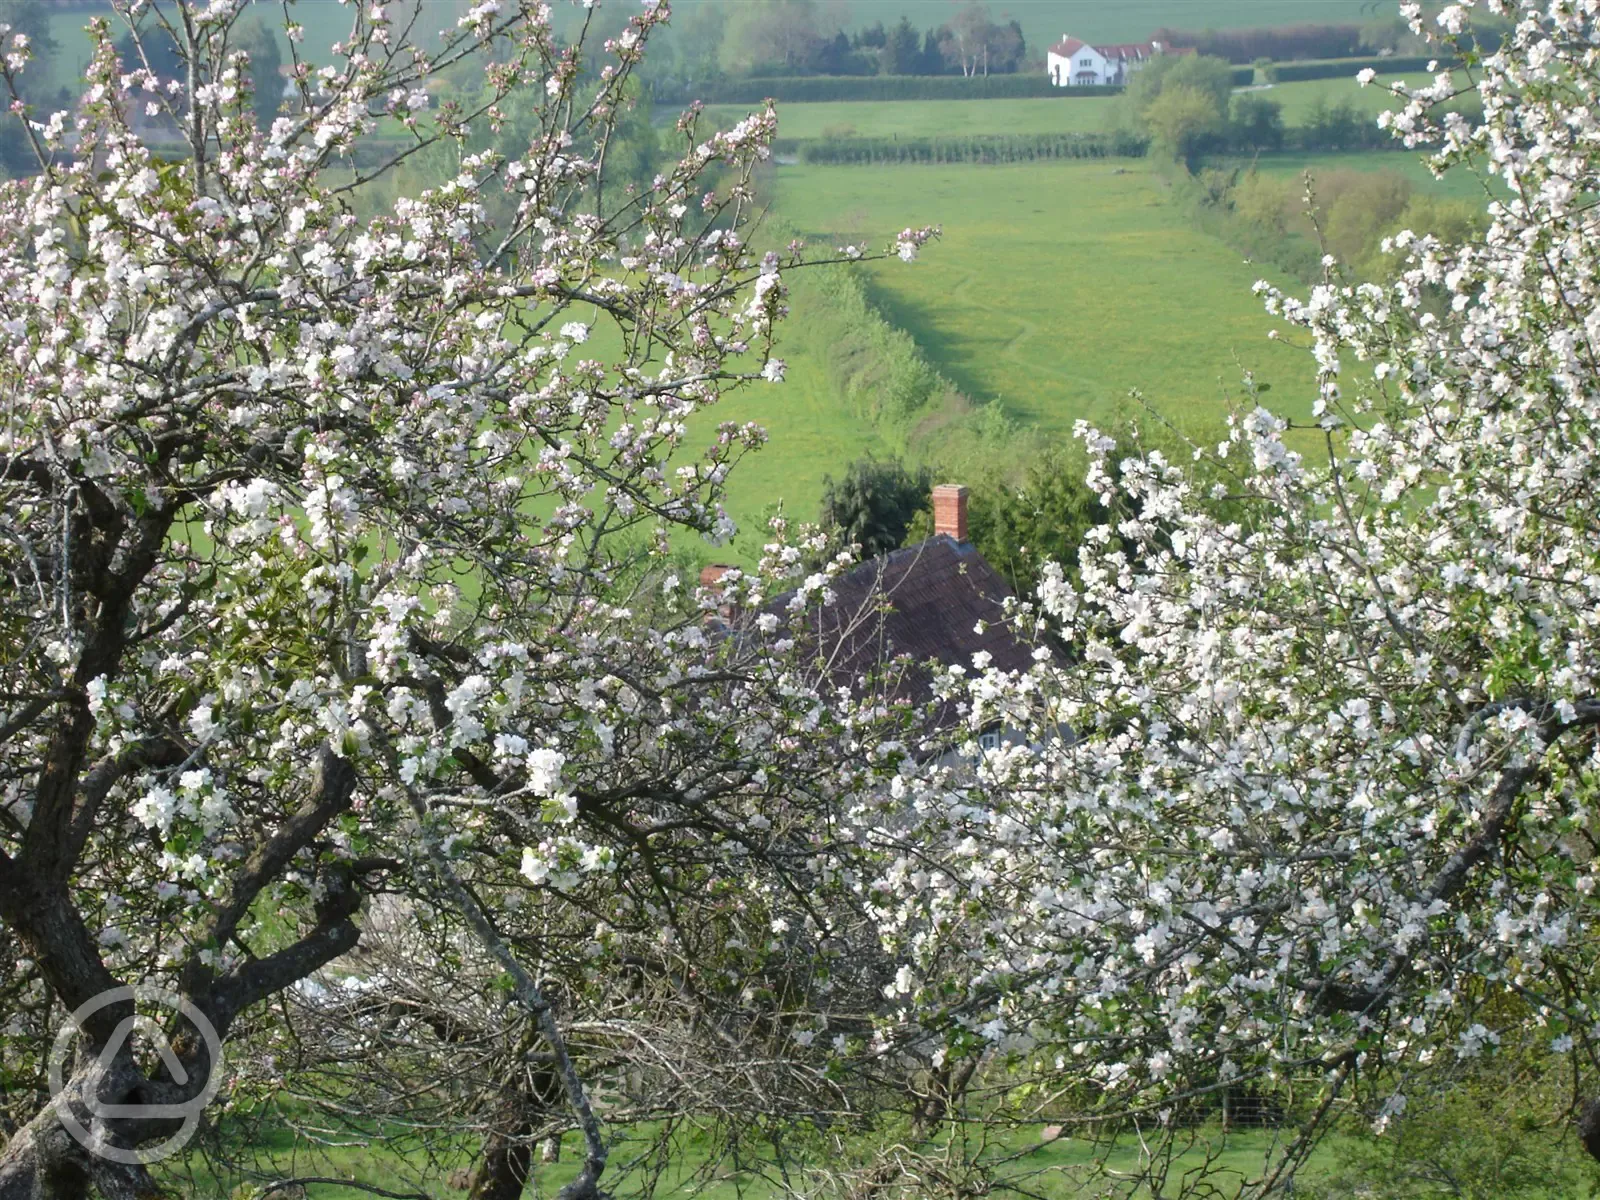 early summer and the cider apple trees are in bloom